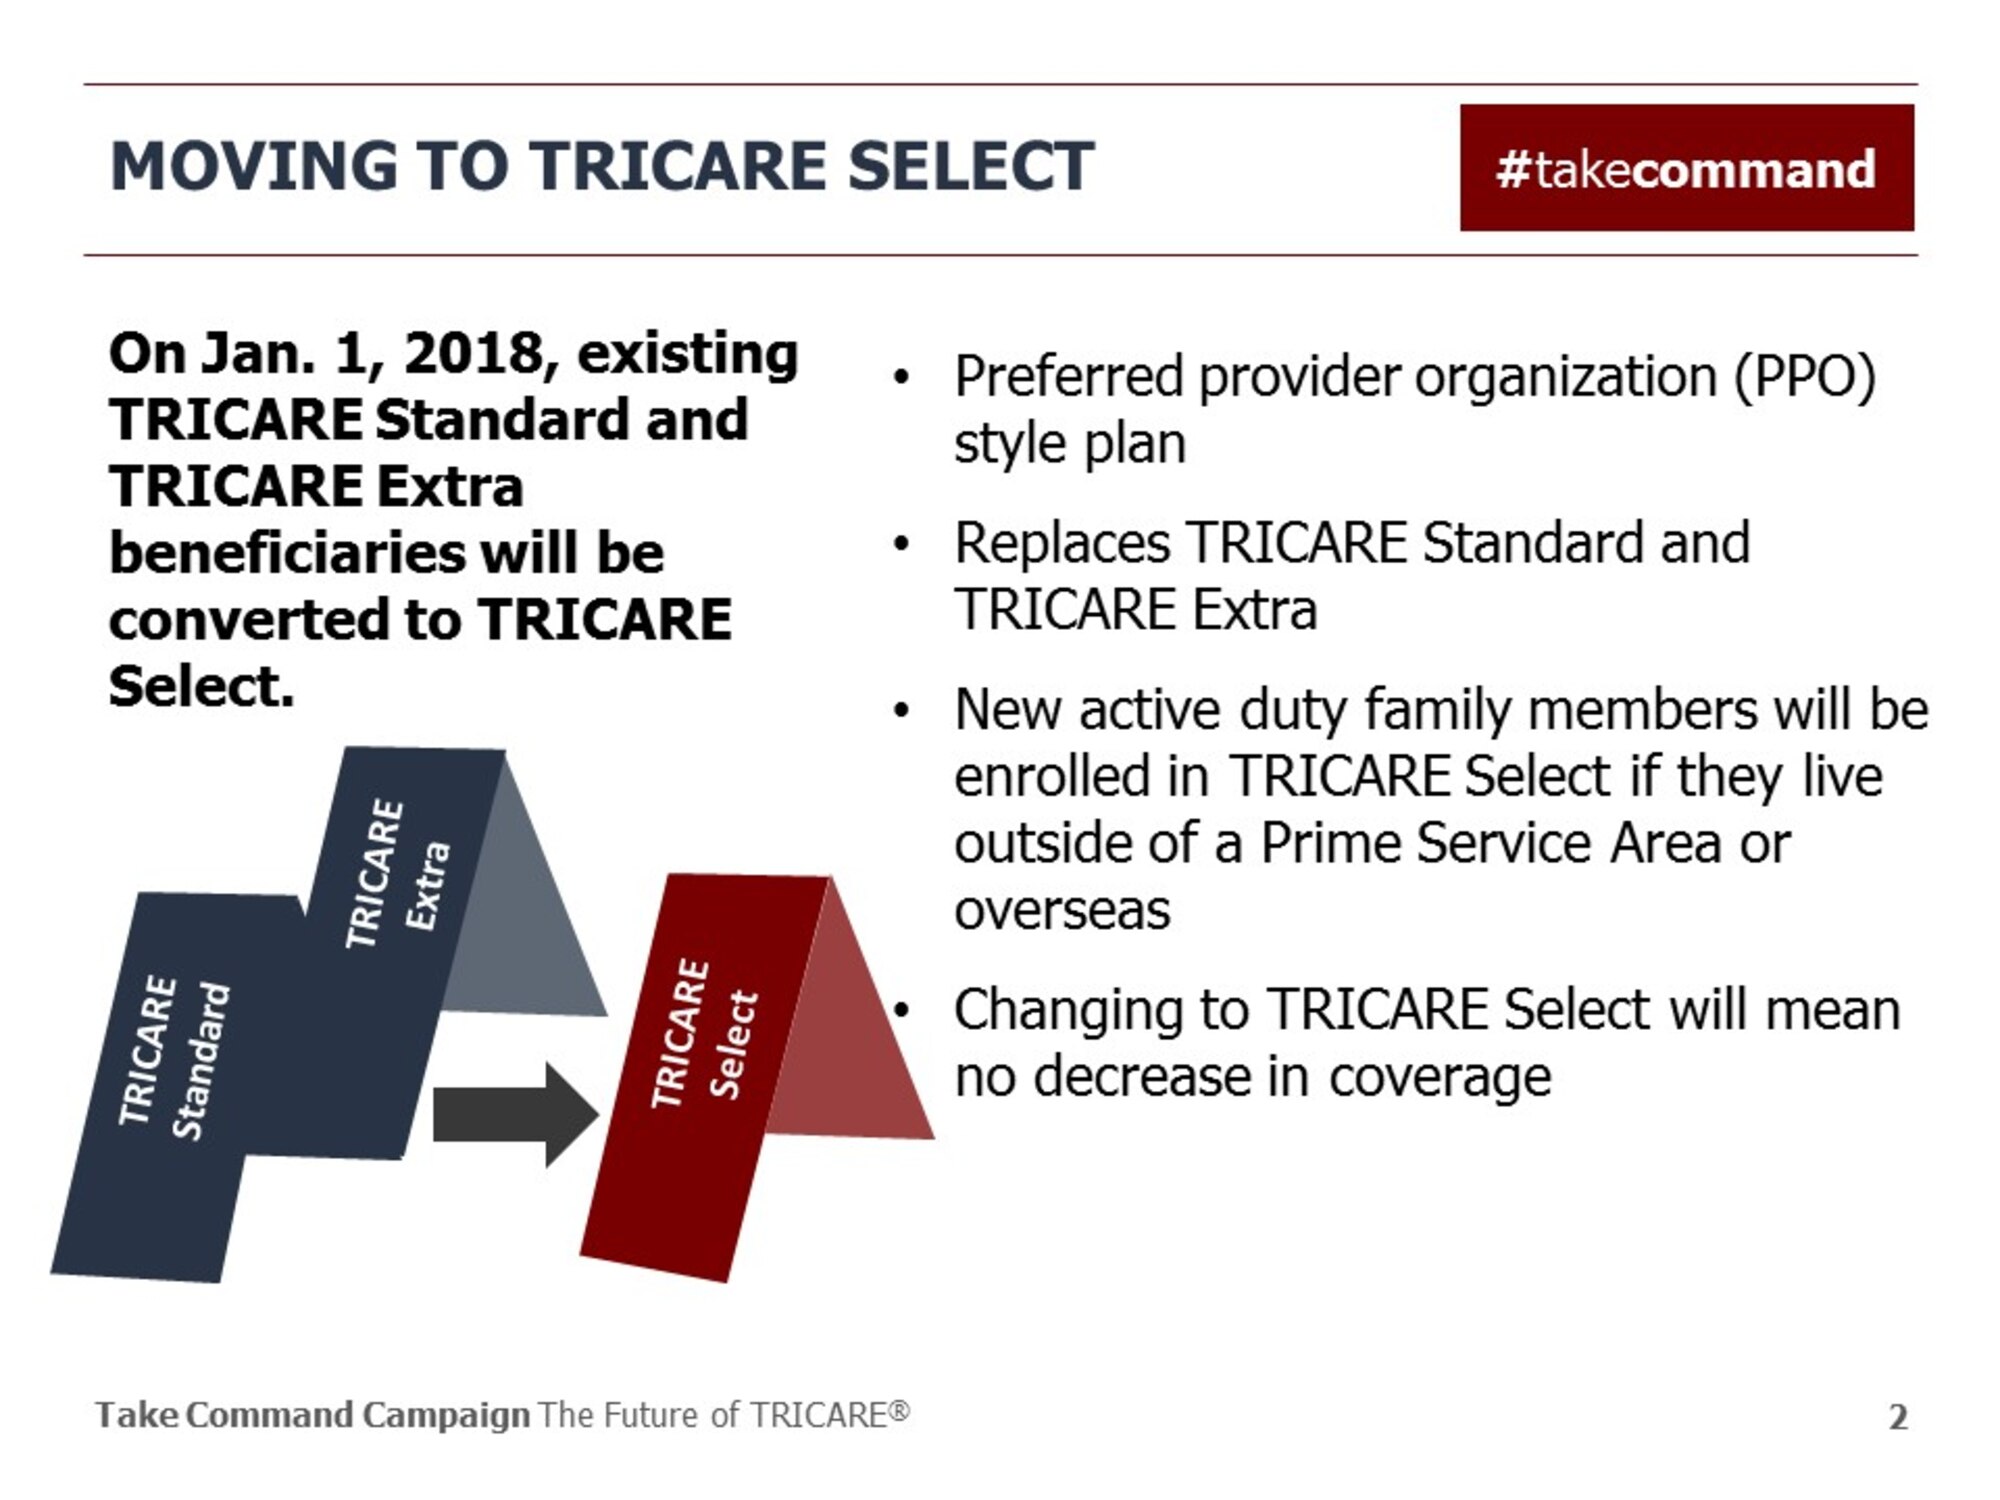 TRICARE Standard and Extra coverage plans will be replaced with TRICARE Select on Jan. 1, 2018. TRICARE for Life members will not be affected by the changes.